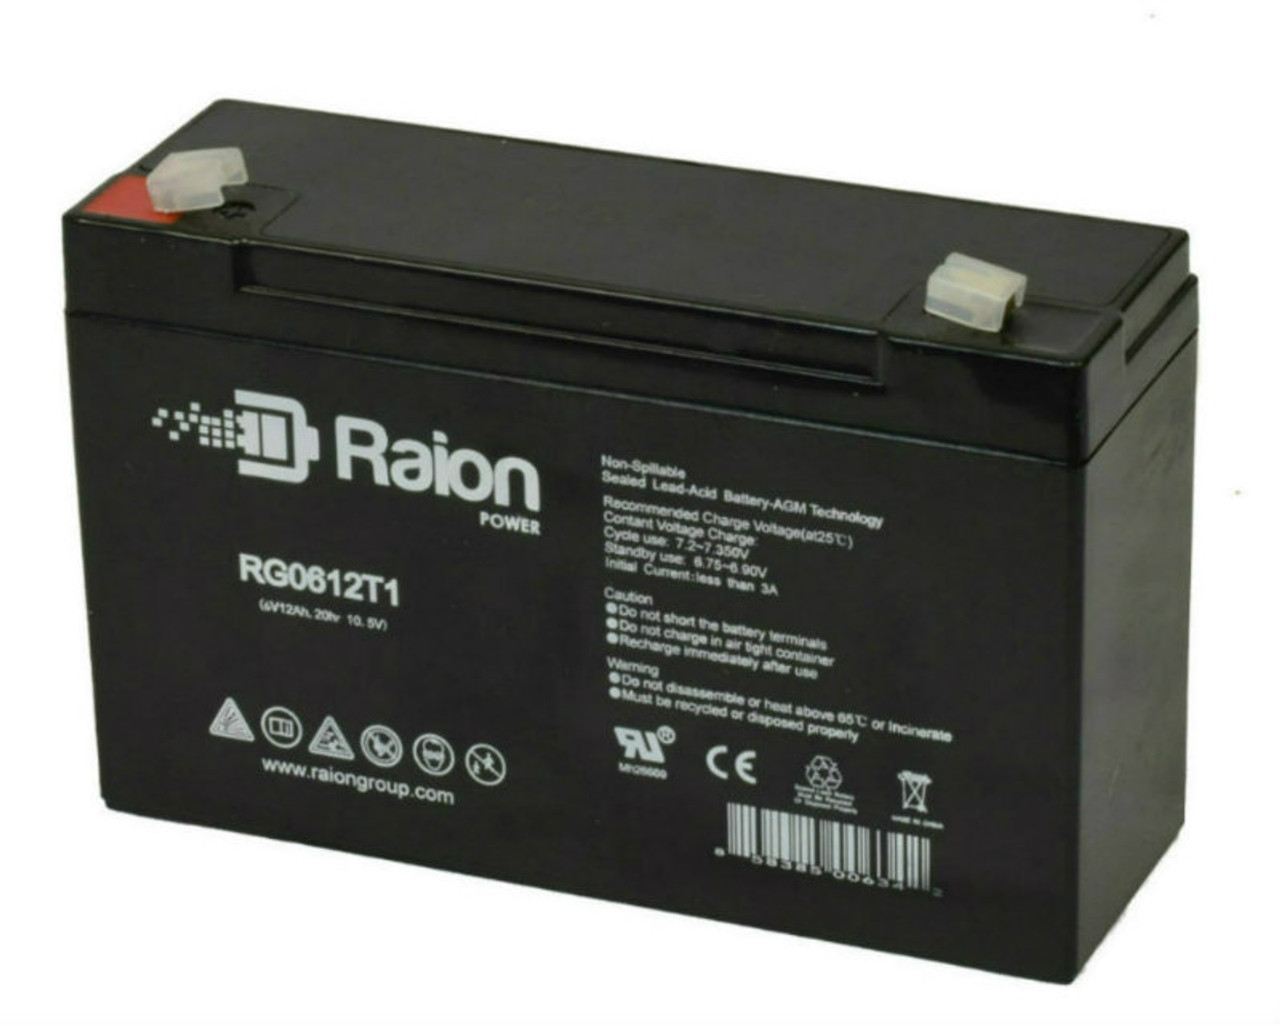 Raion Power RG06120T1 Replacement Emergency Light Battery for National Power Corporation GT050R4